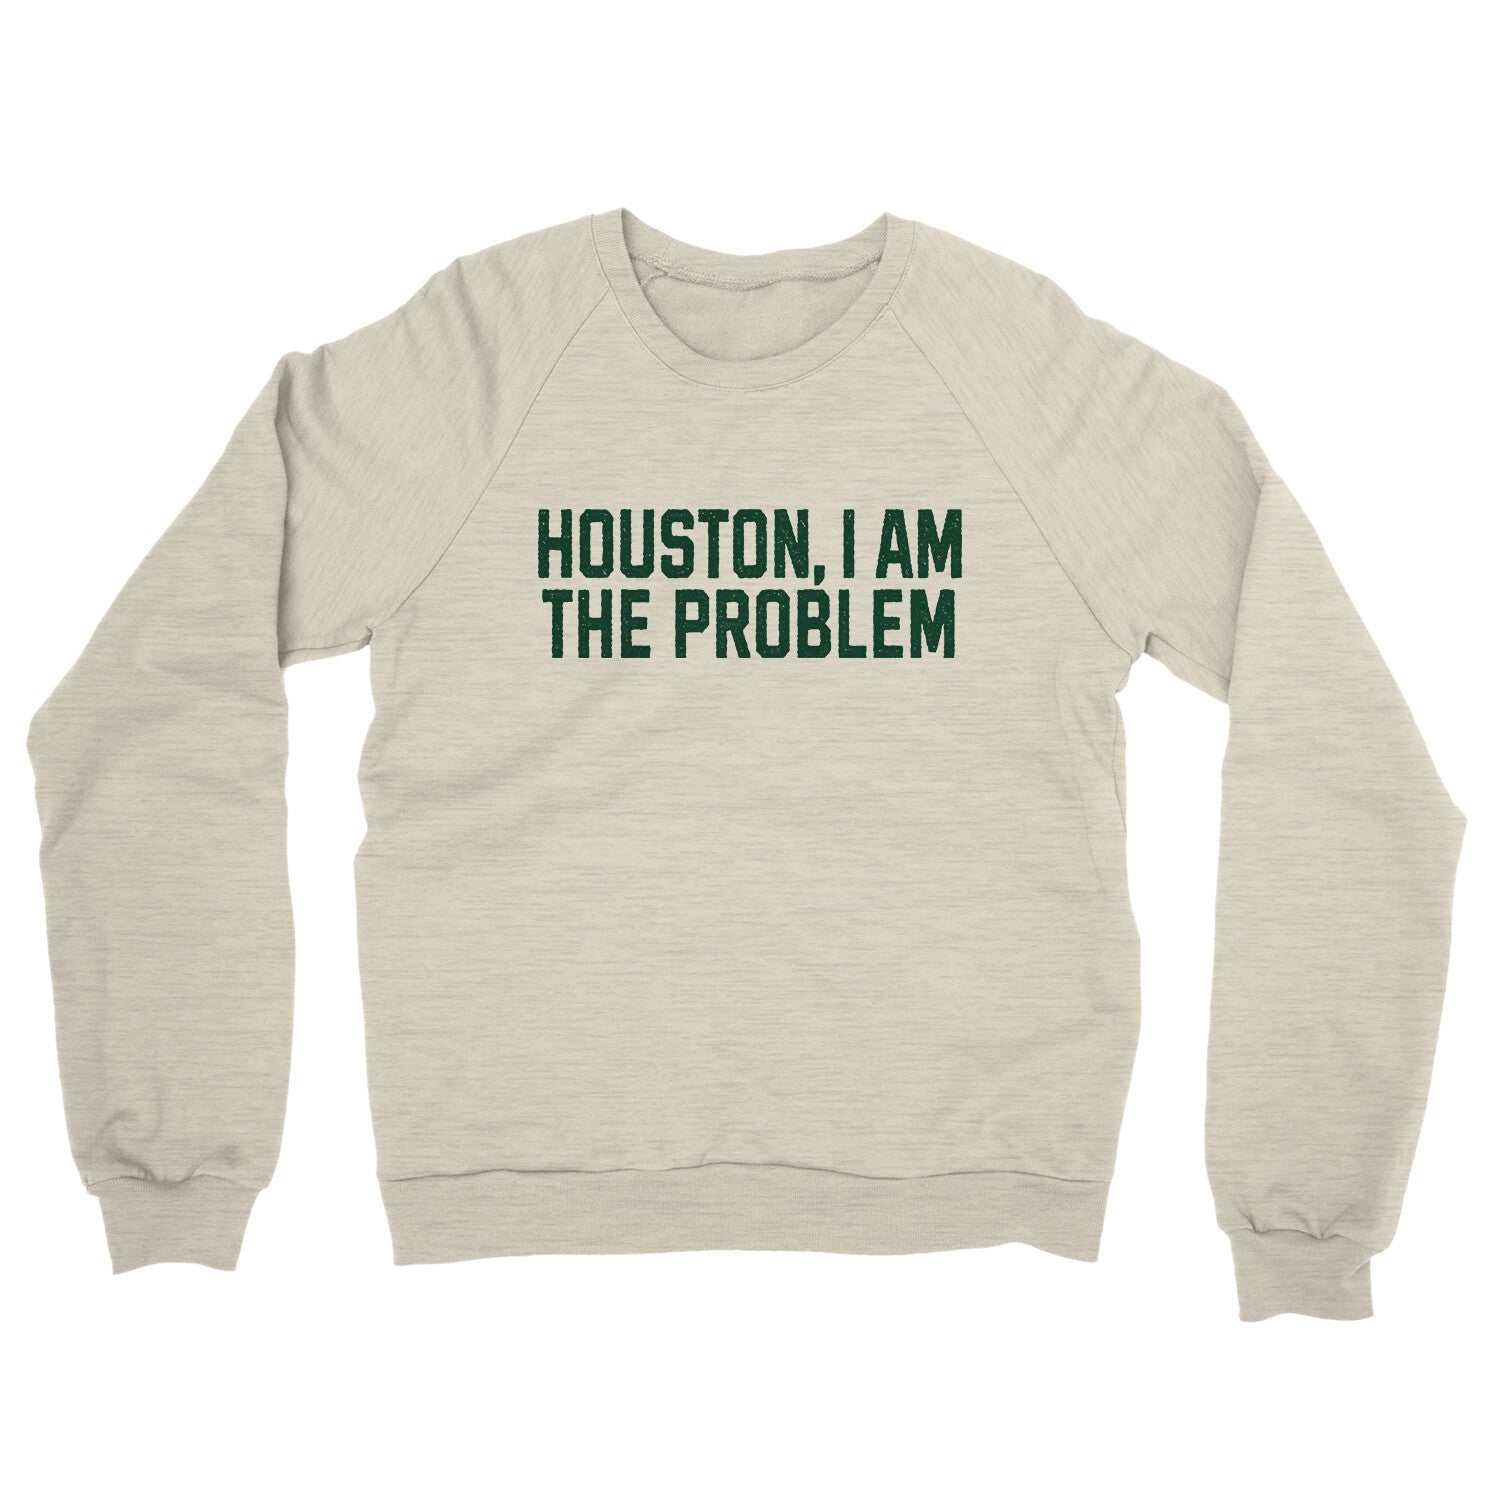 Houston I Am the Problem in Heather Oatmeal Color